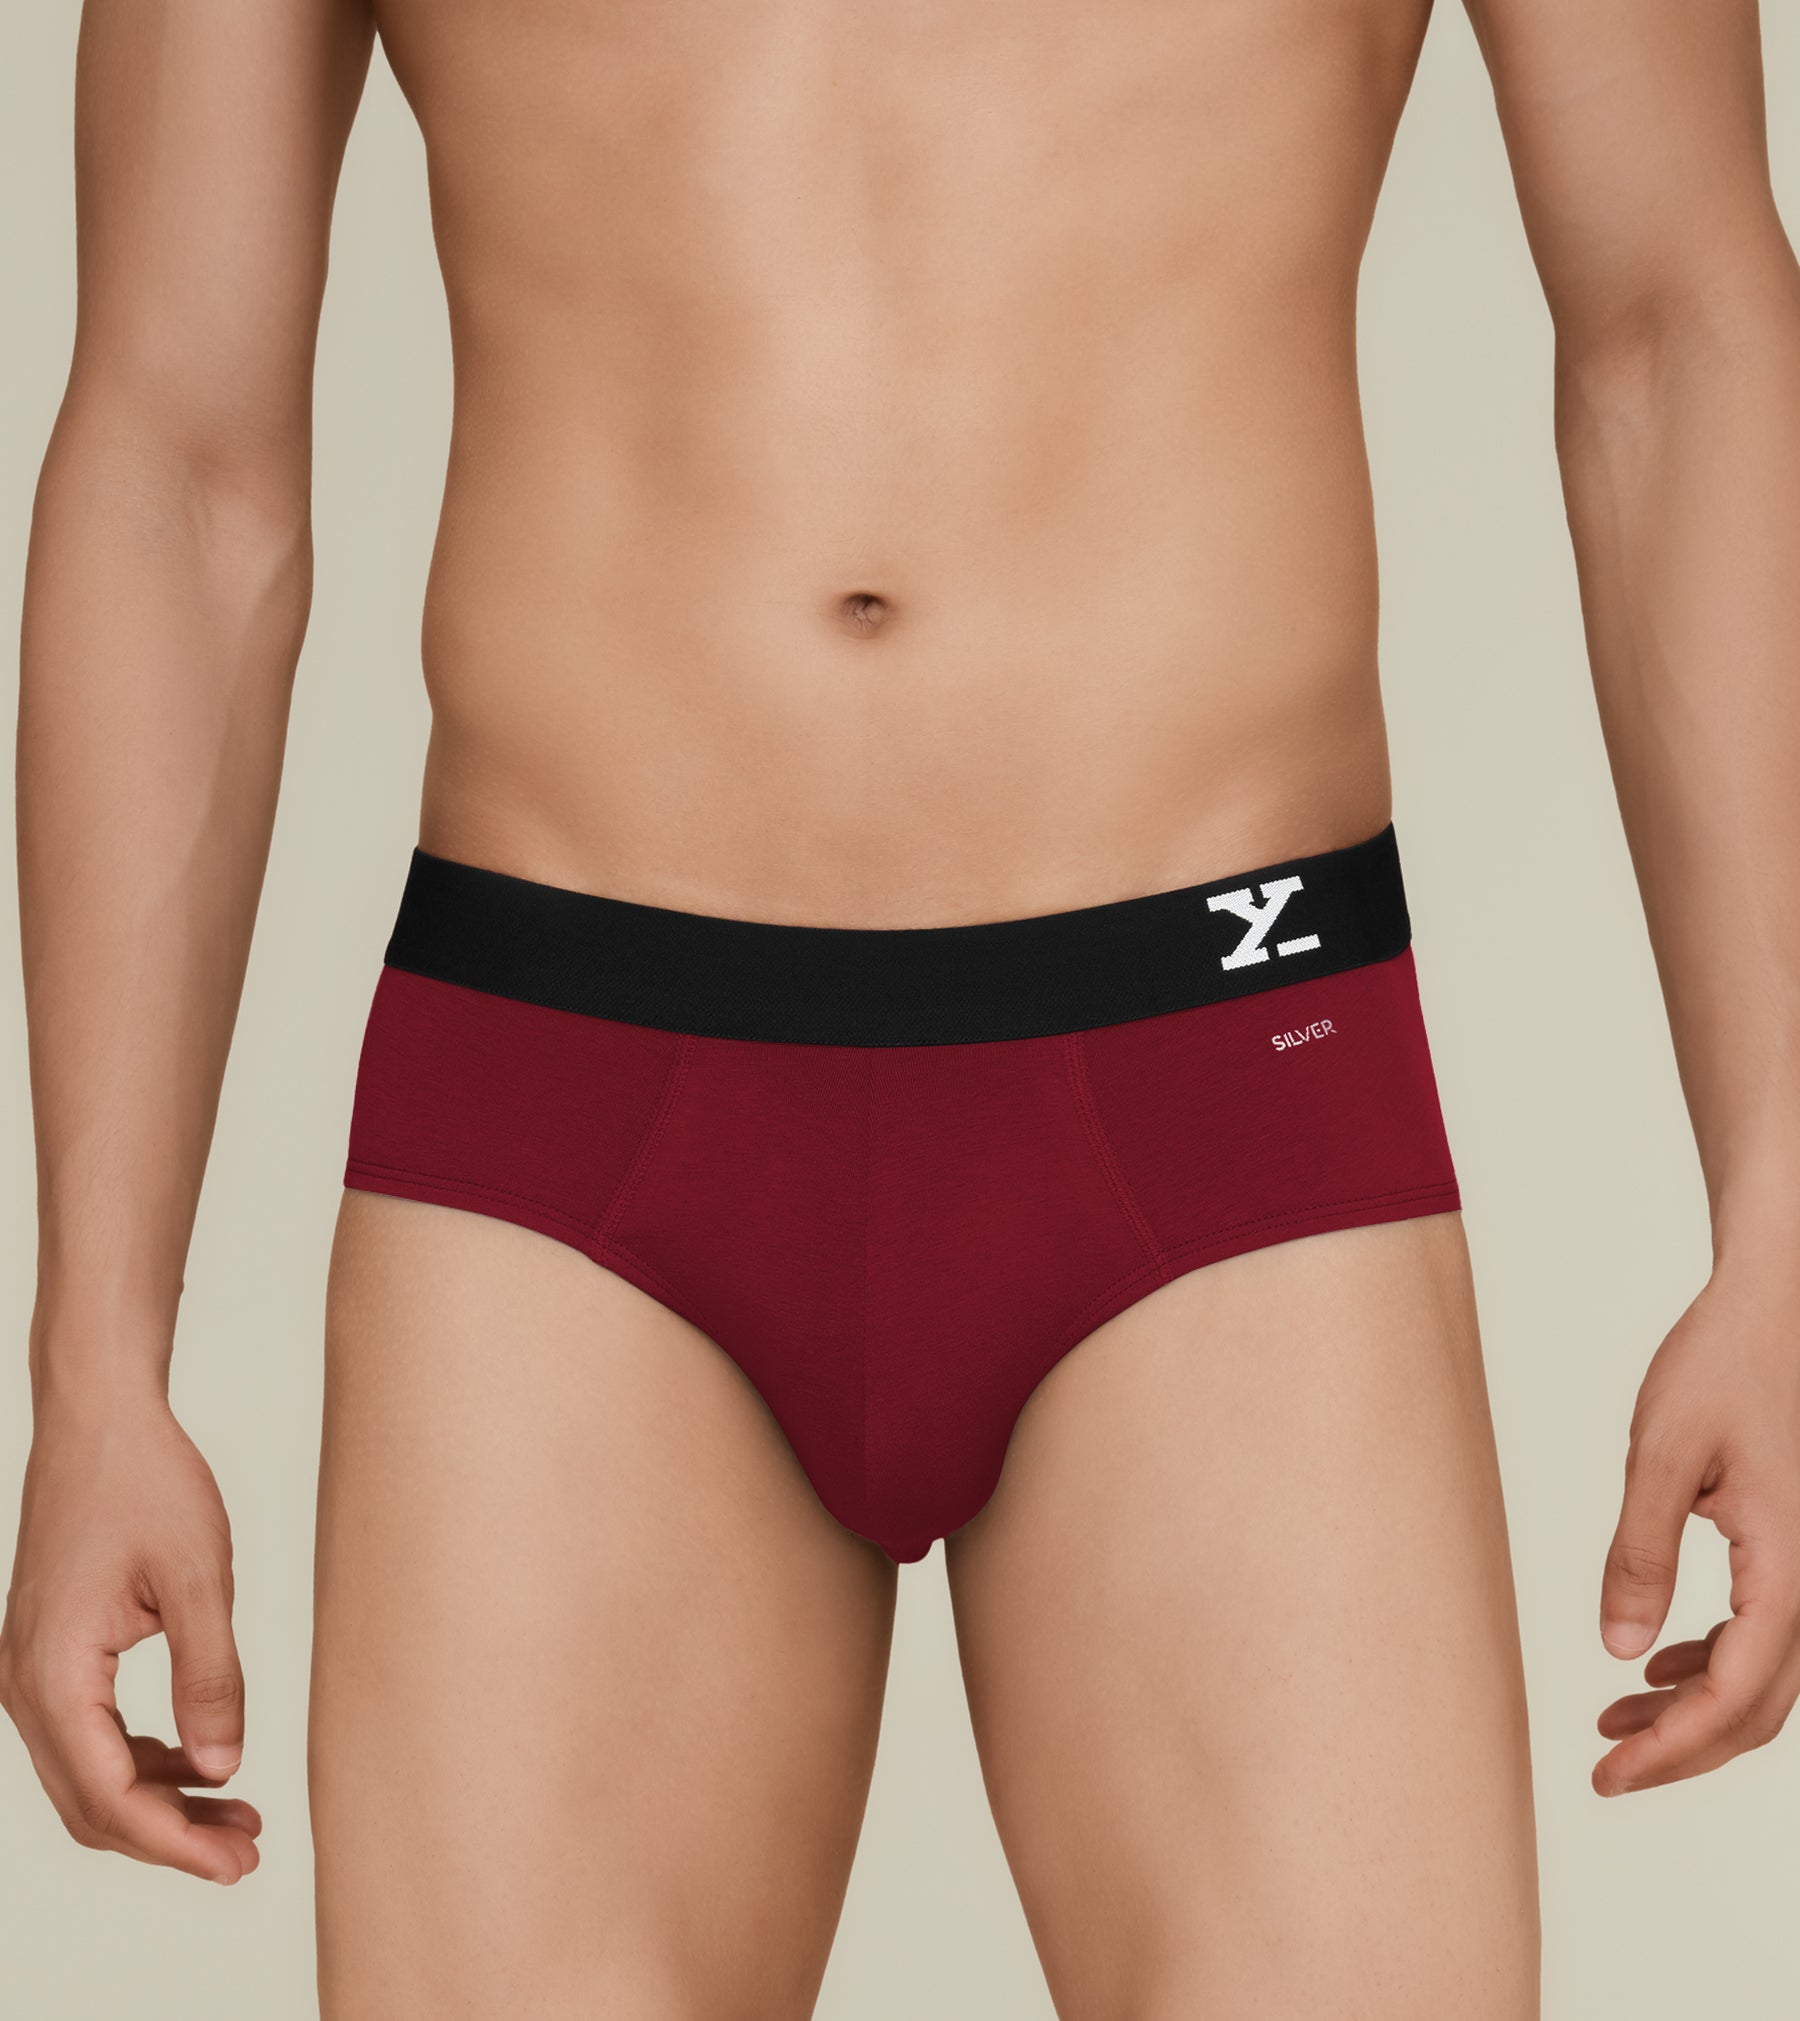 Aero Silver Cotton Briefs For Men Pack of 2(Maroon, Light Blue) -  XYXX Mens Apparels